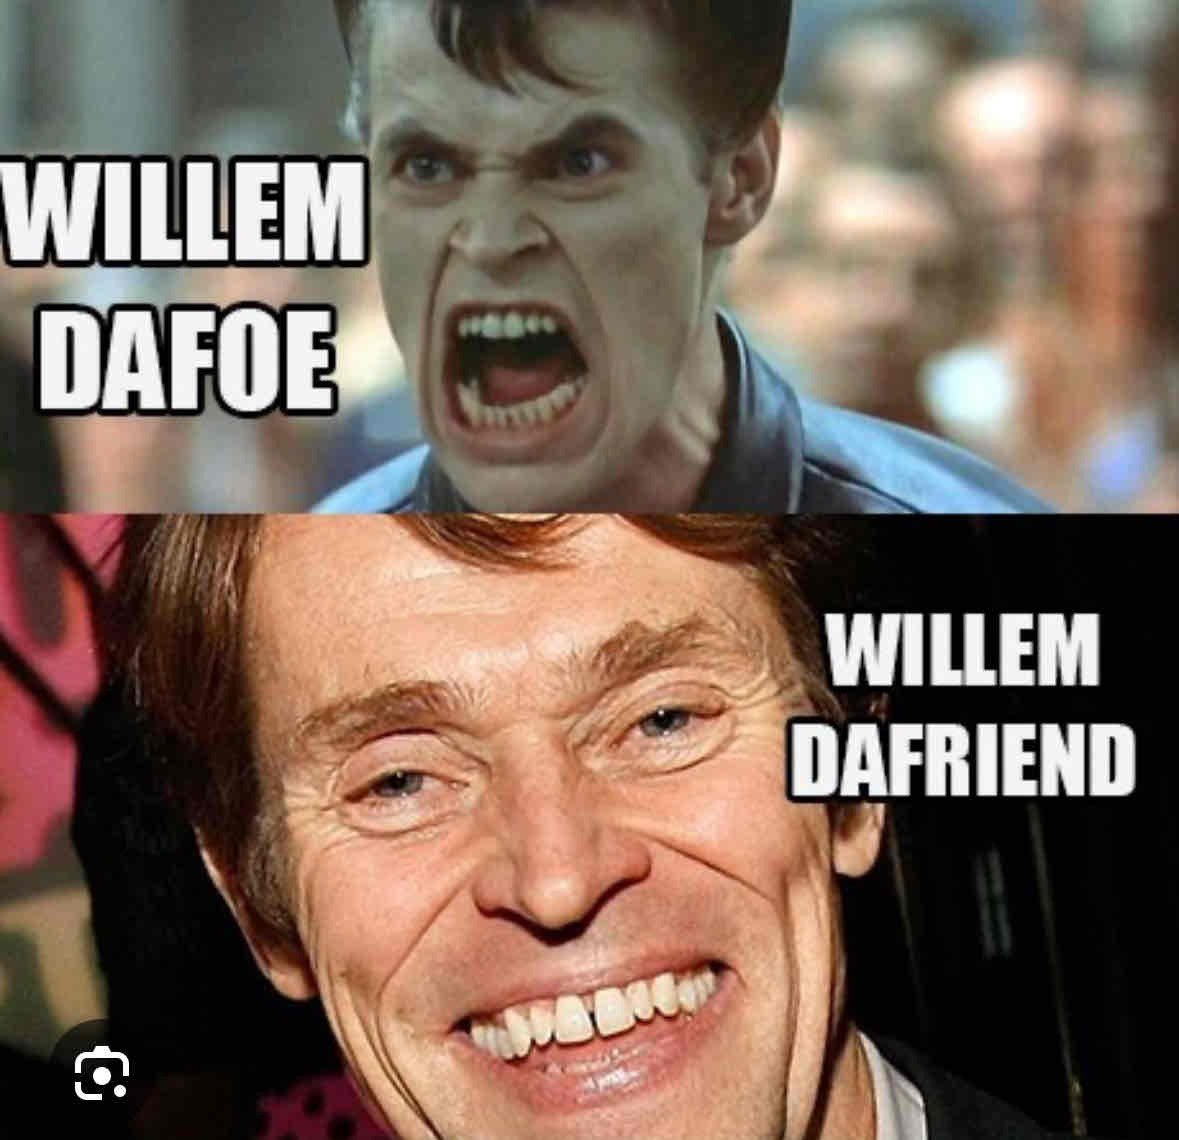 picture of Willem Dafoe screaming with text Willem Dafoe and Willem Dafoe smiling with text Willem Dafriend